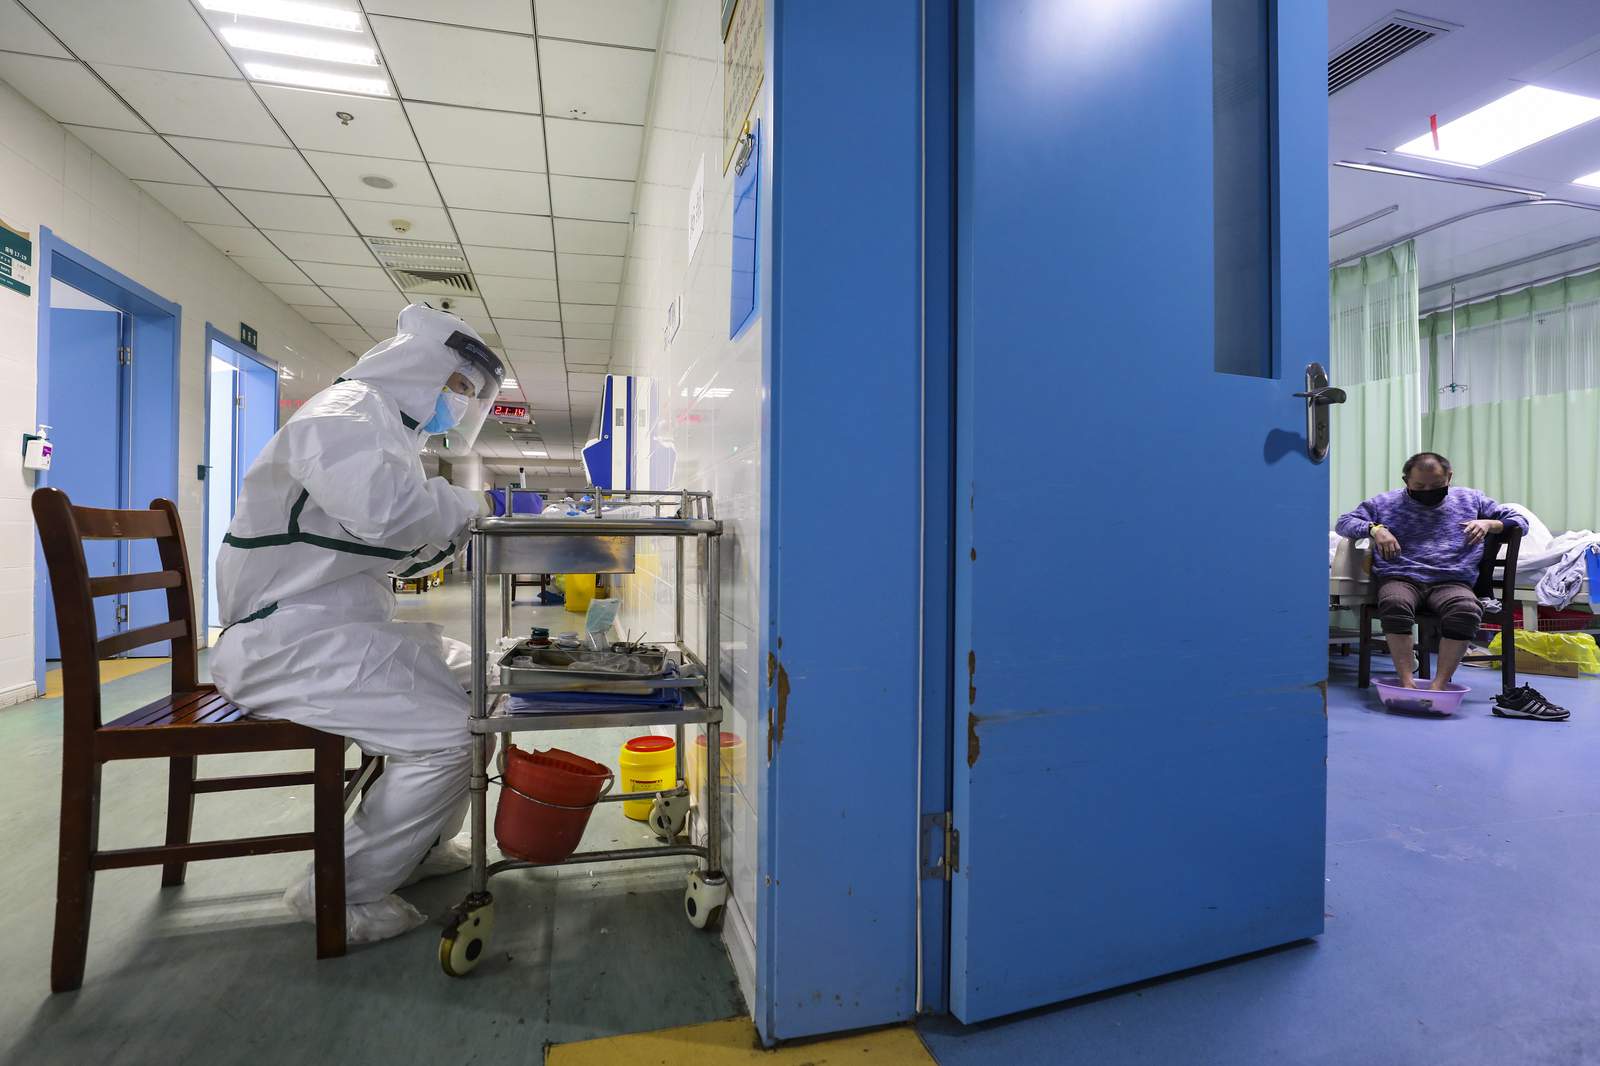 The Latest: WHO to send mission to virus-hit China